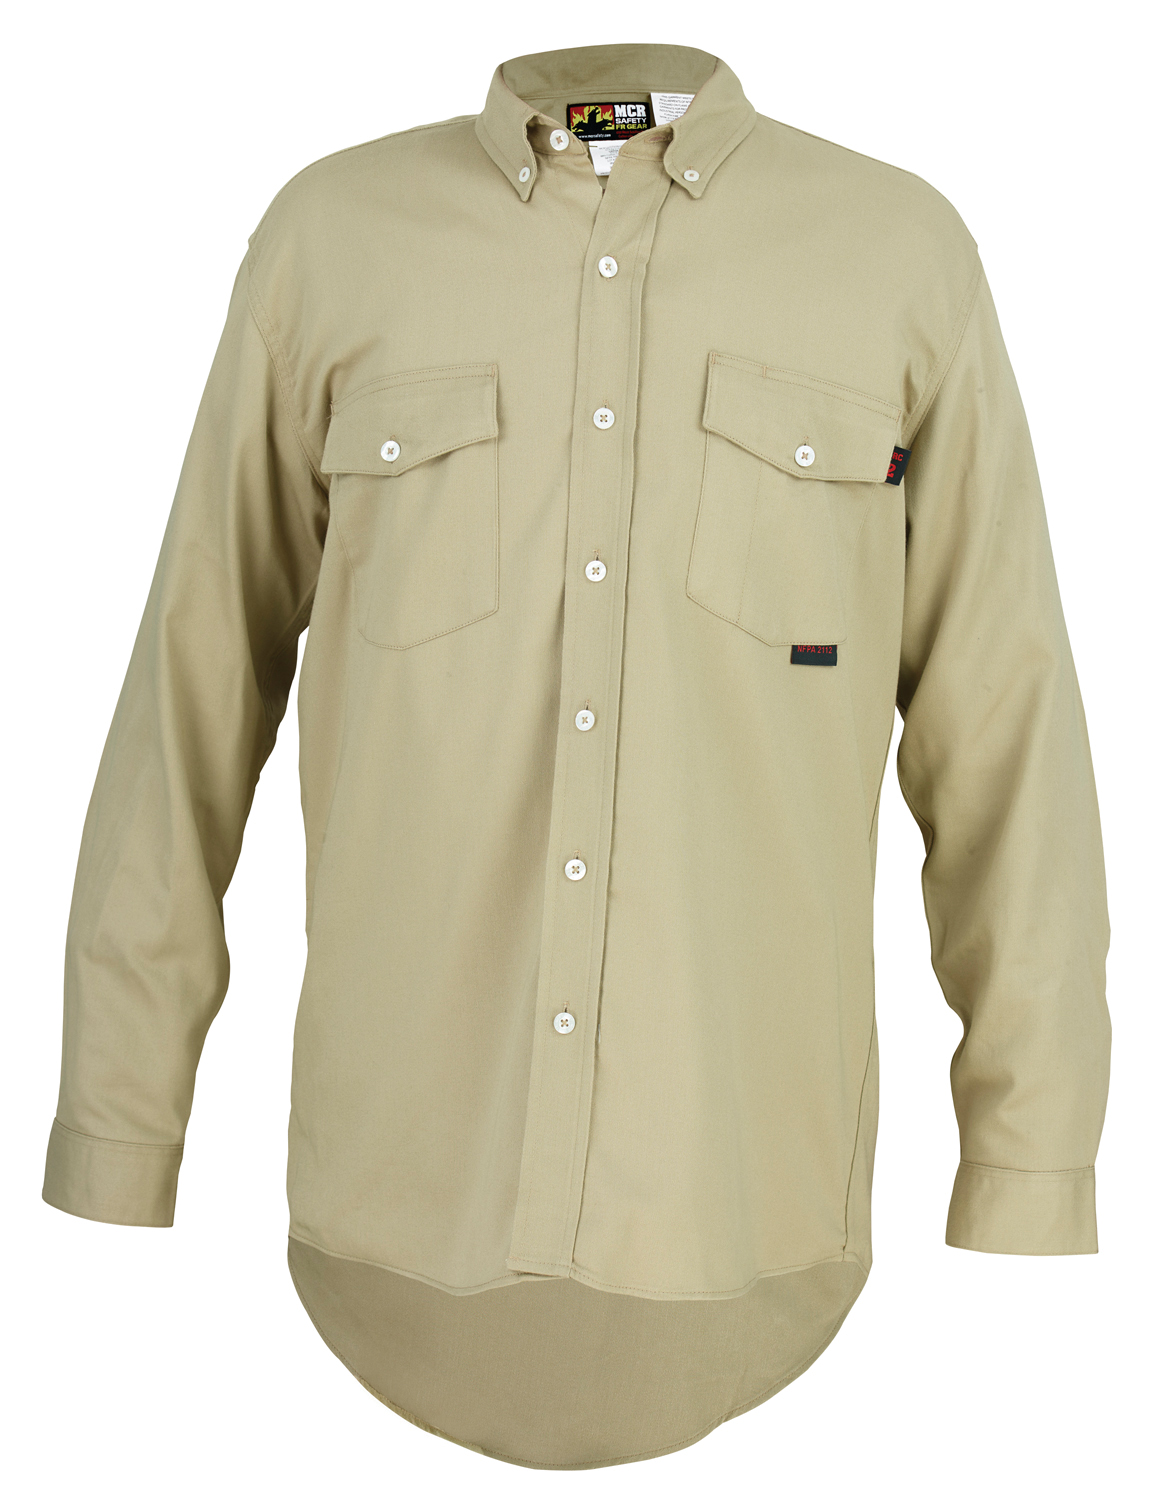 Flame Resistant Shirts | Ark Safety